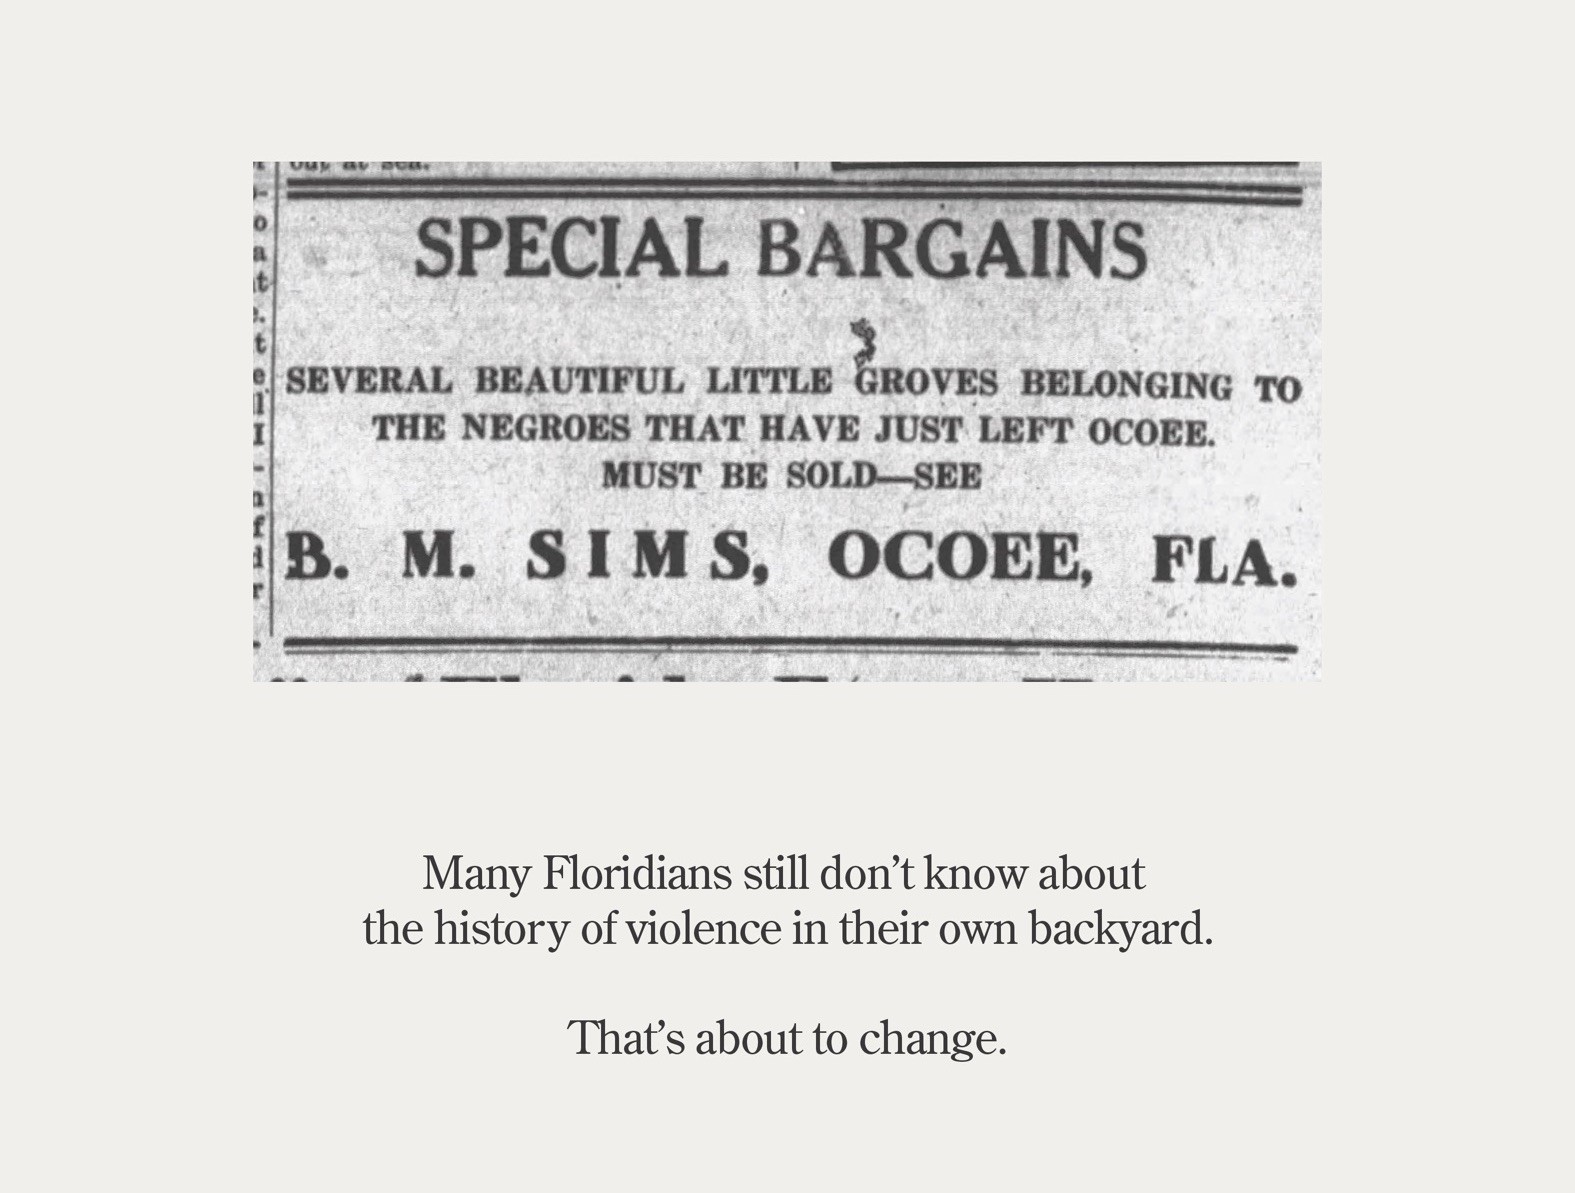 100 years ago in Ocoee, Black residents were murdered and driven off the land they owned, yet few know the story (8)